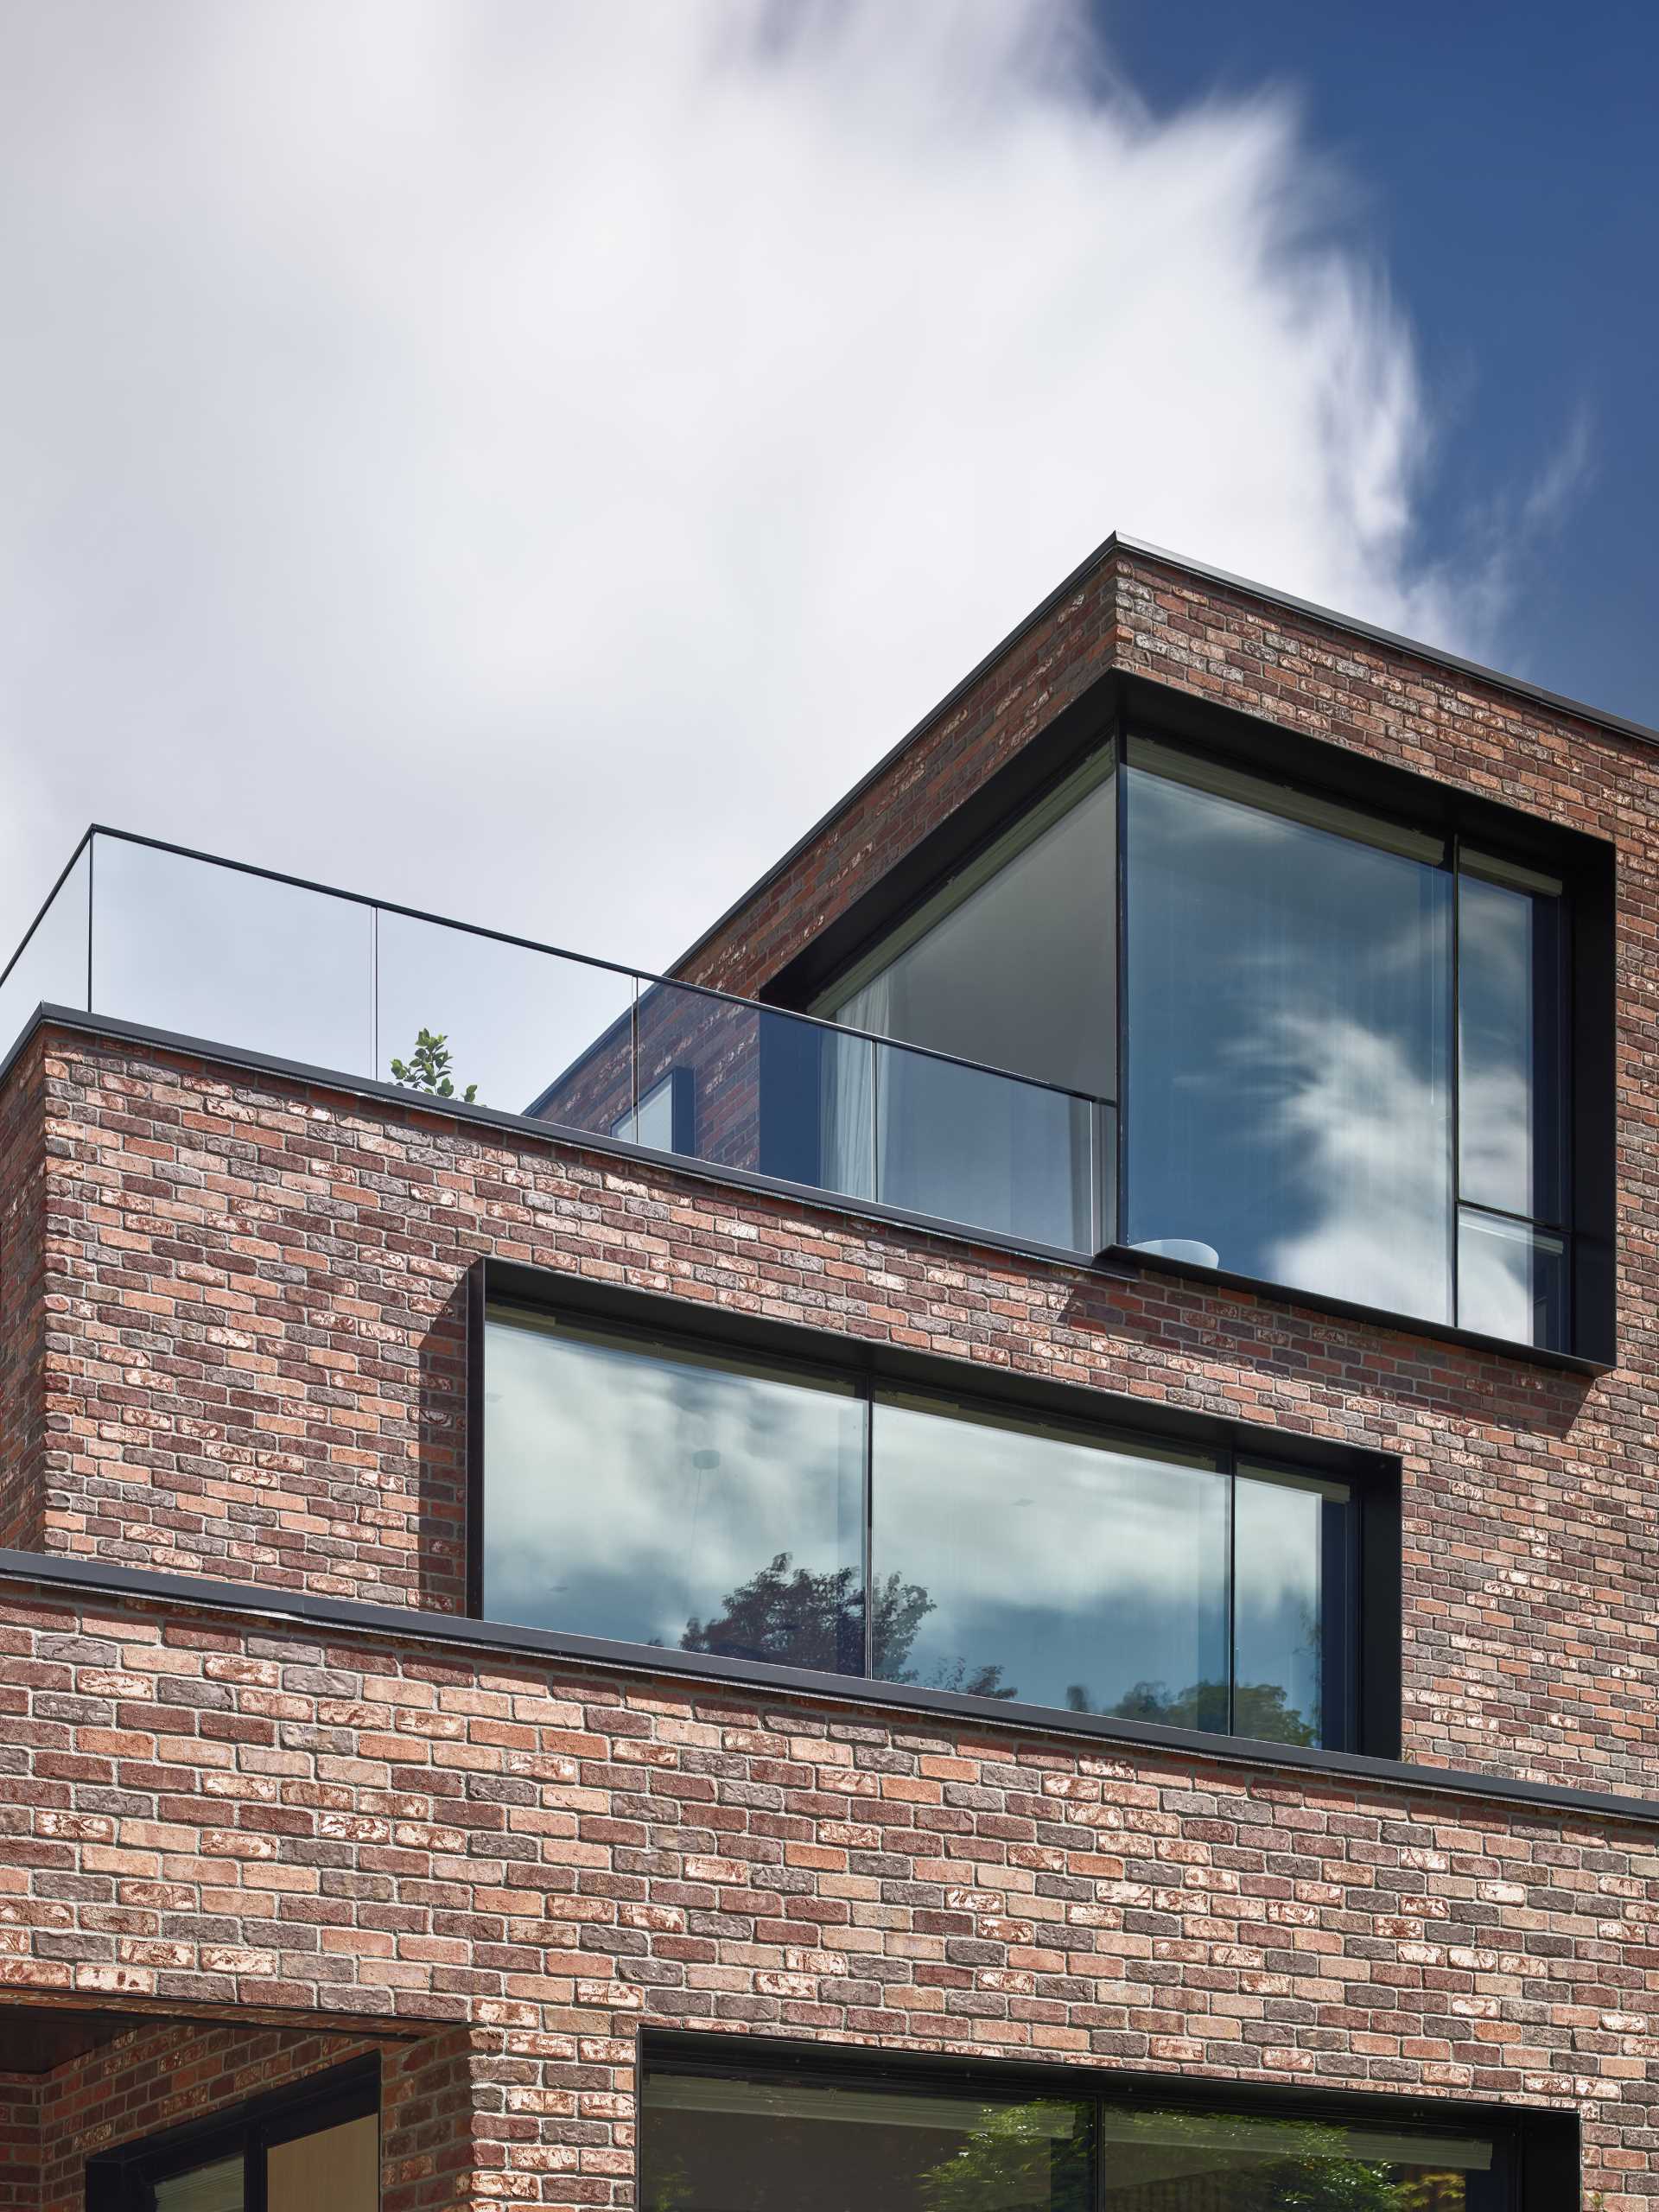 A modern brick house with black window frames and glass railings.